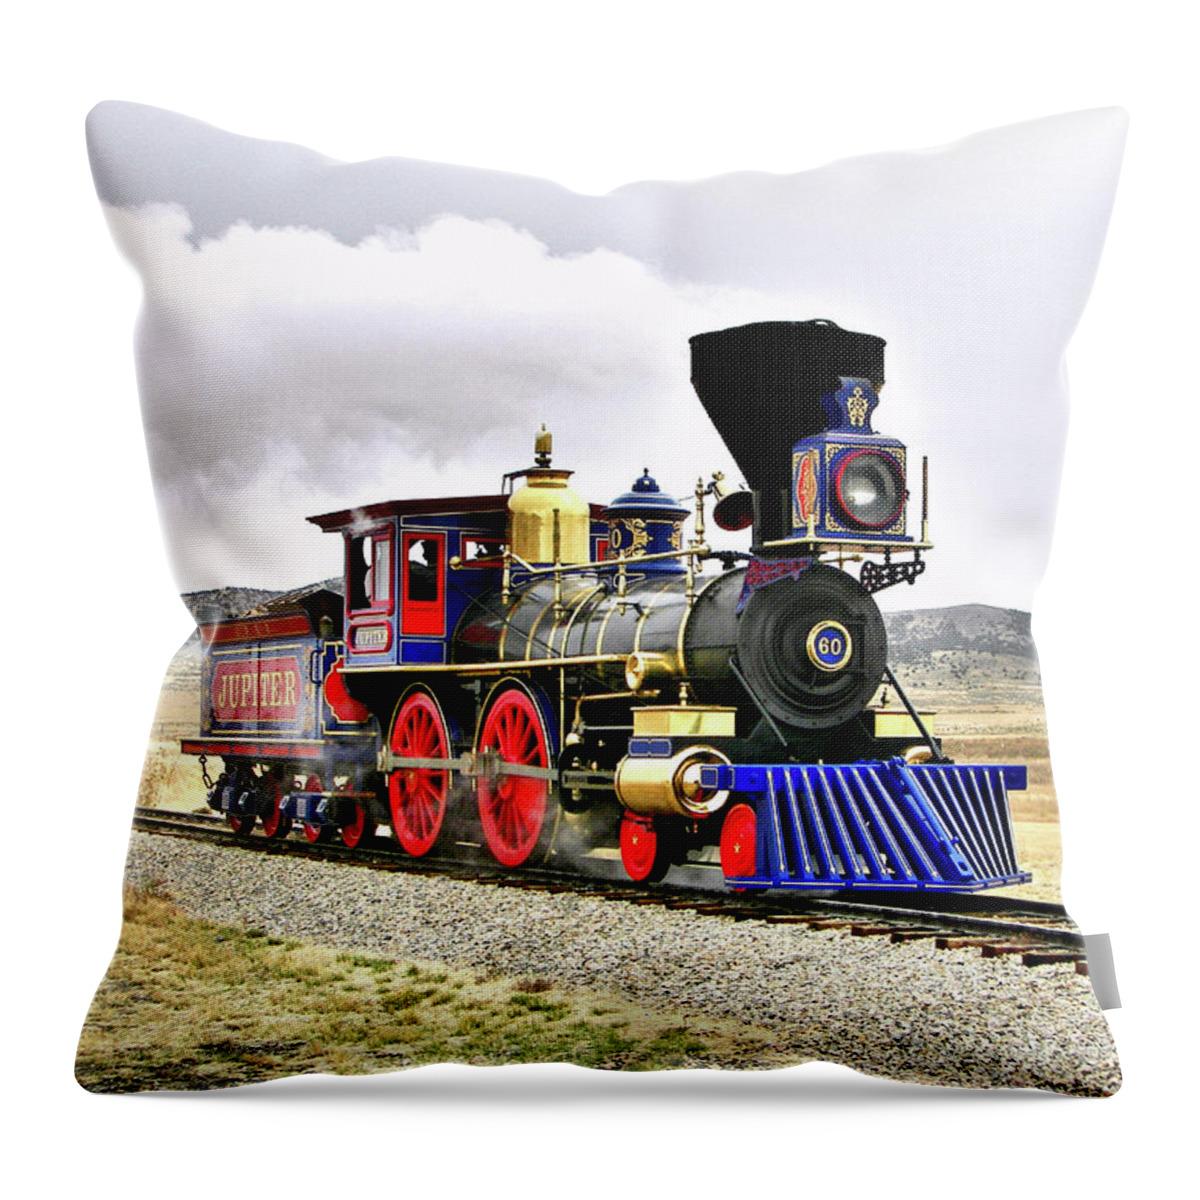 60 Throw Pillow featuring the photograph 60 by David Lawson